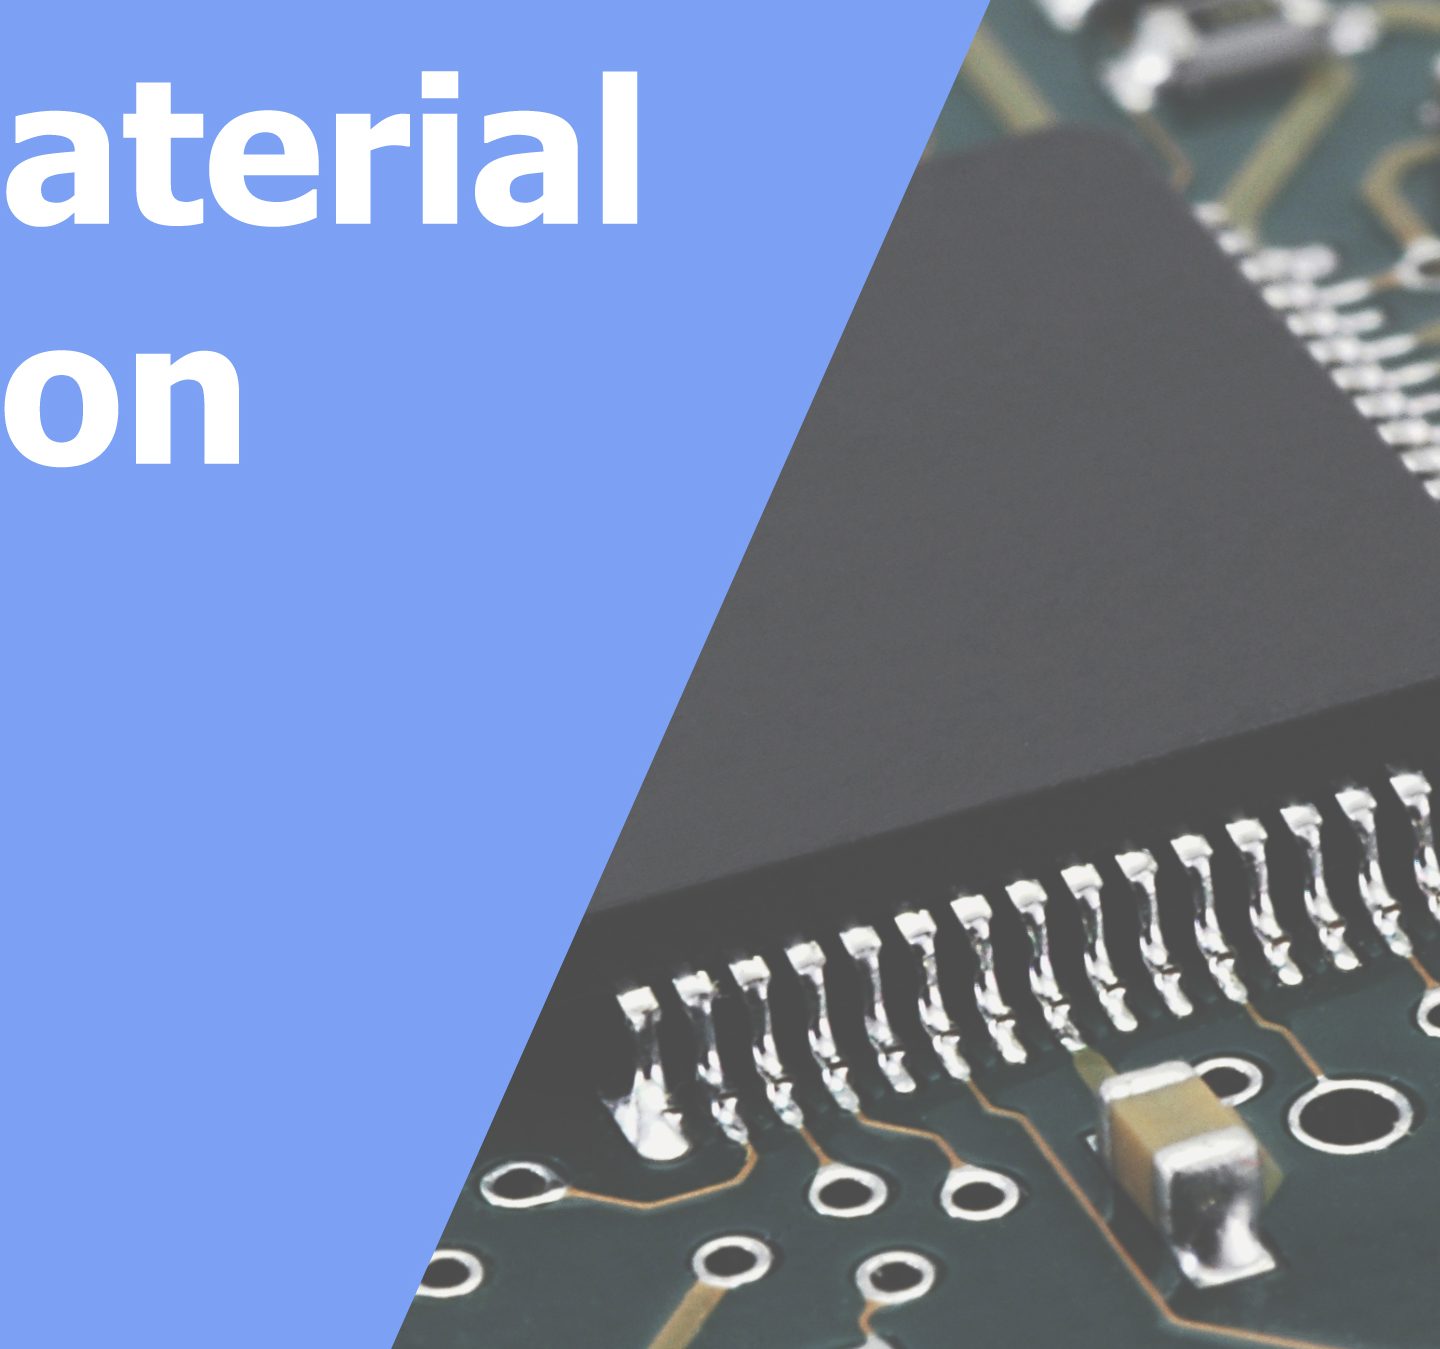 Base PCB Material: What to choose? – Vol.2